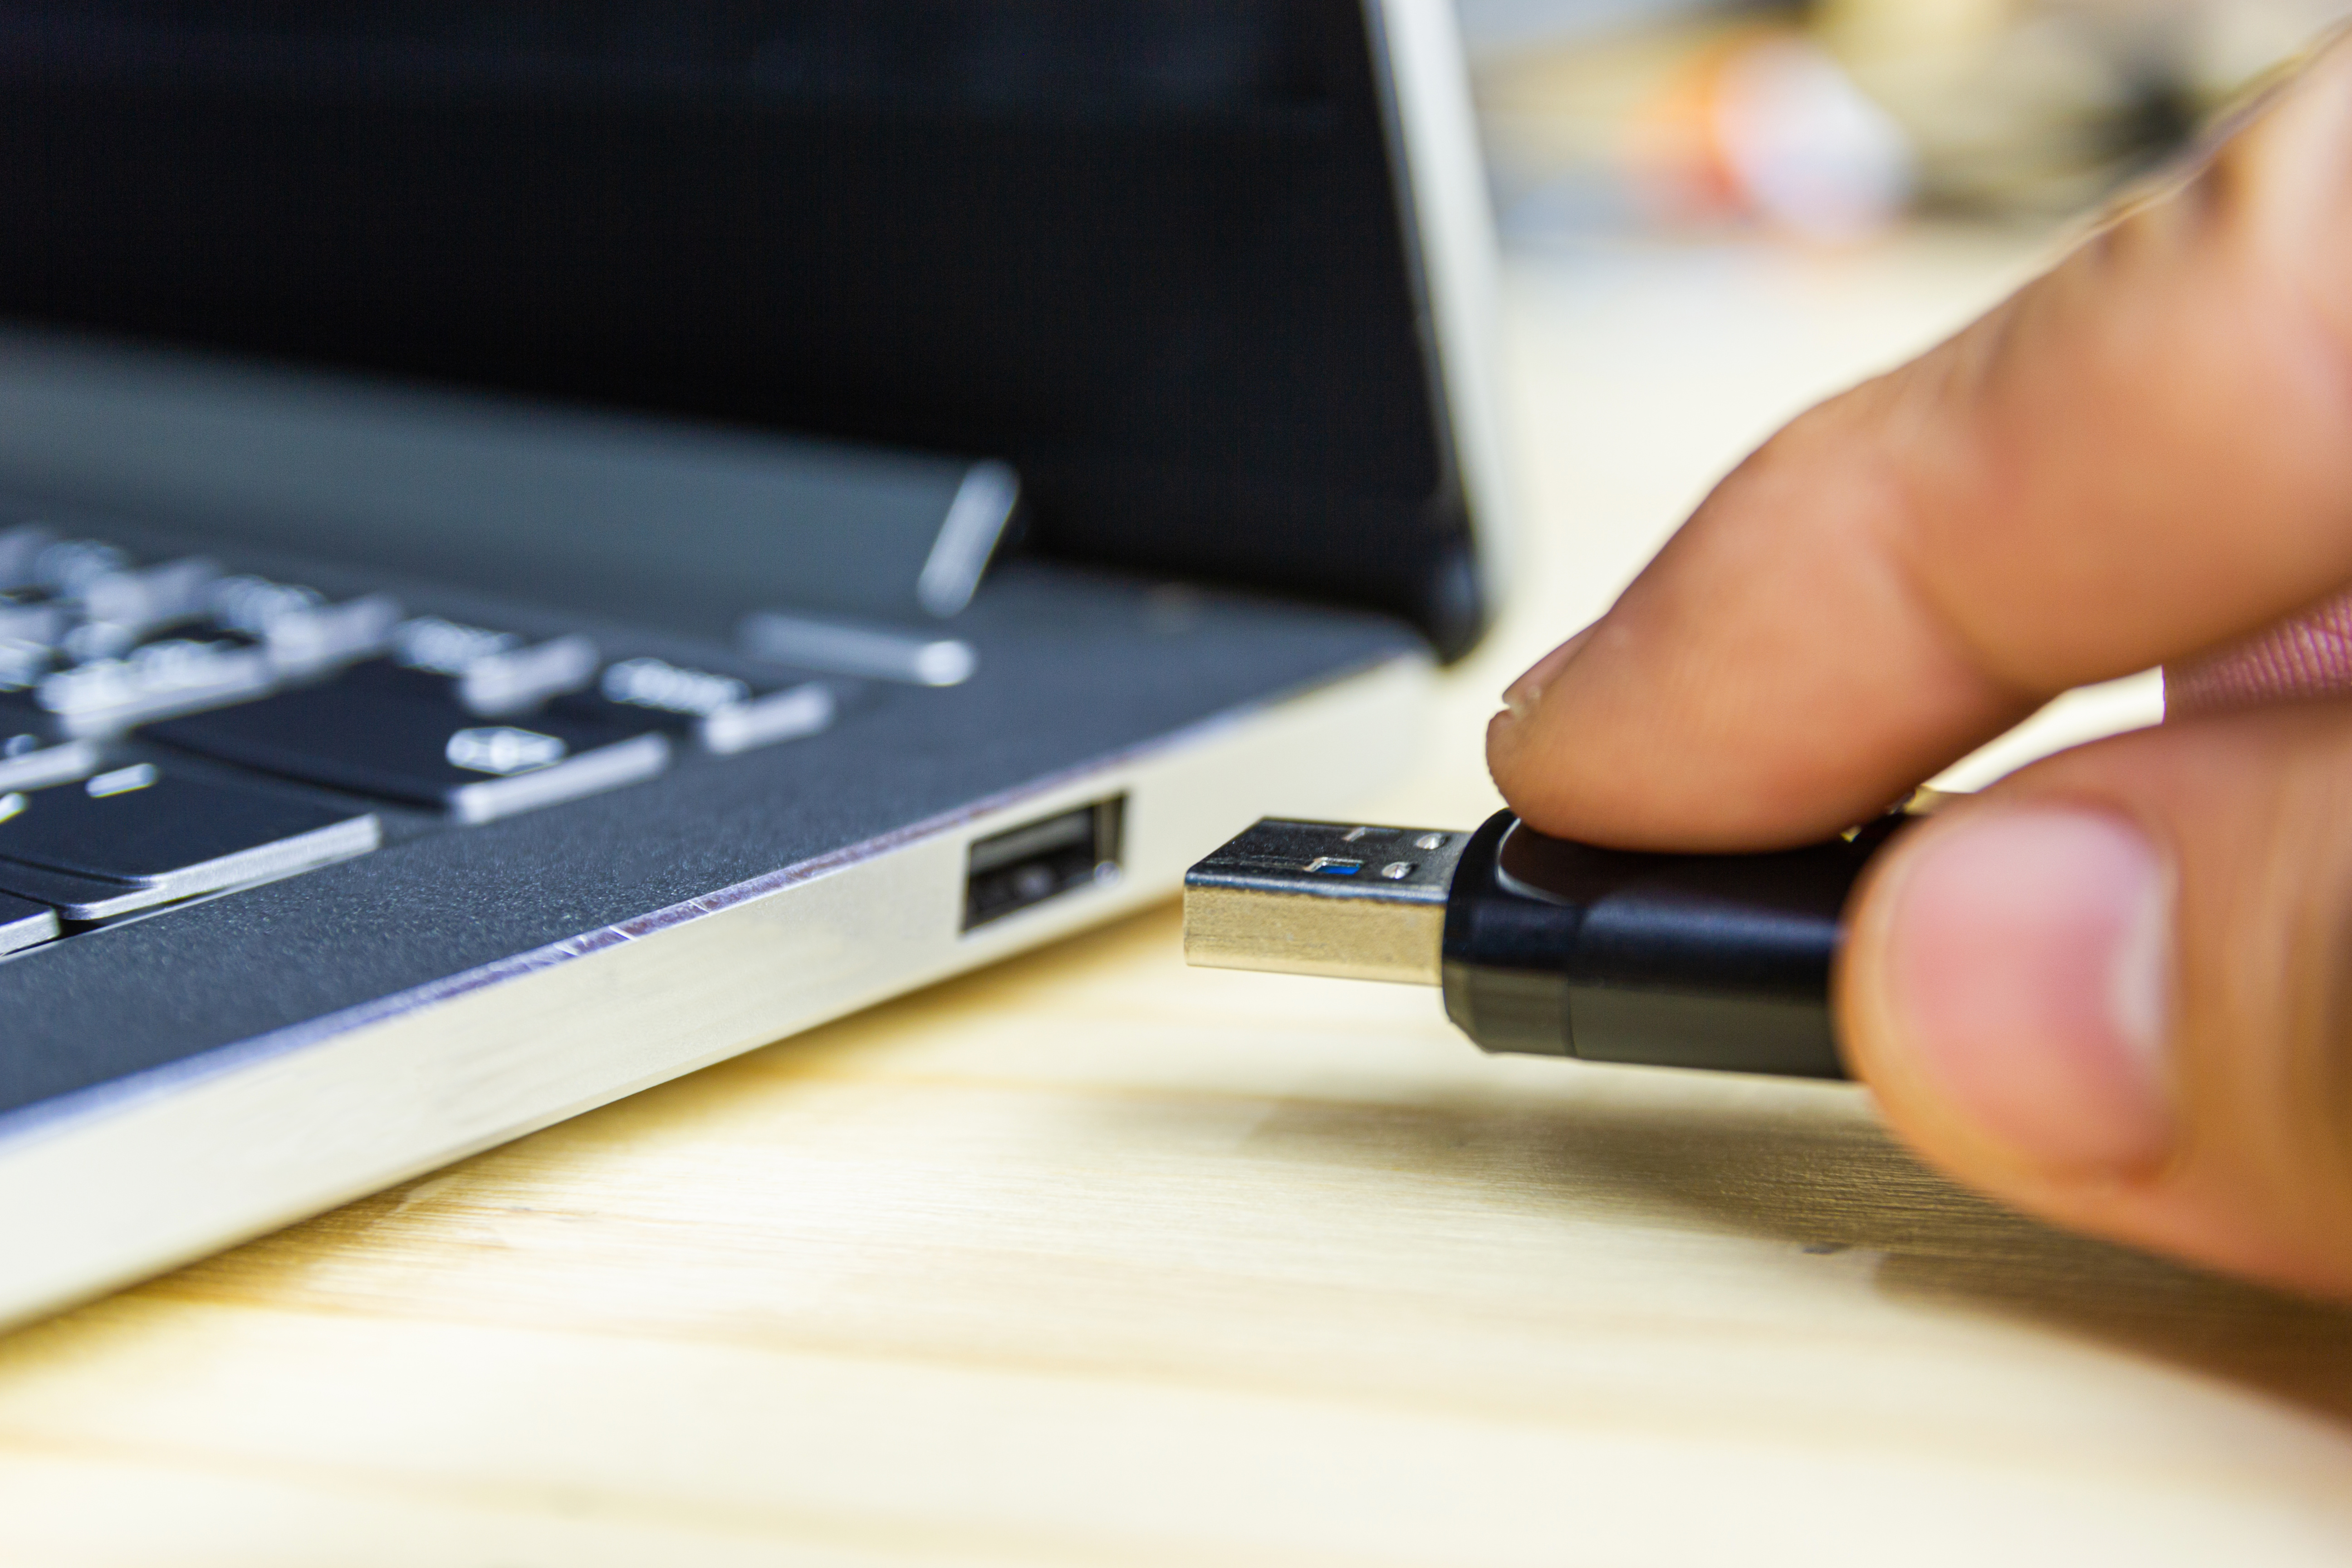 cyber attack using a usb devise 